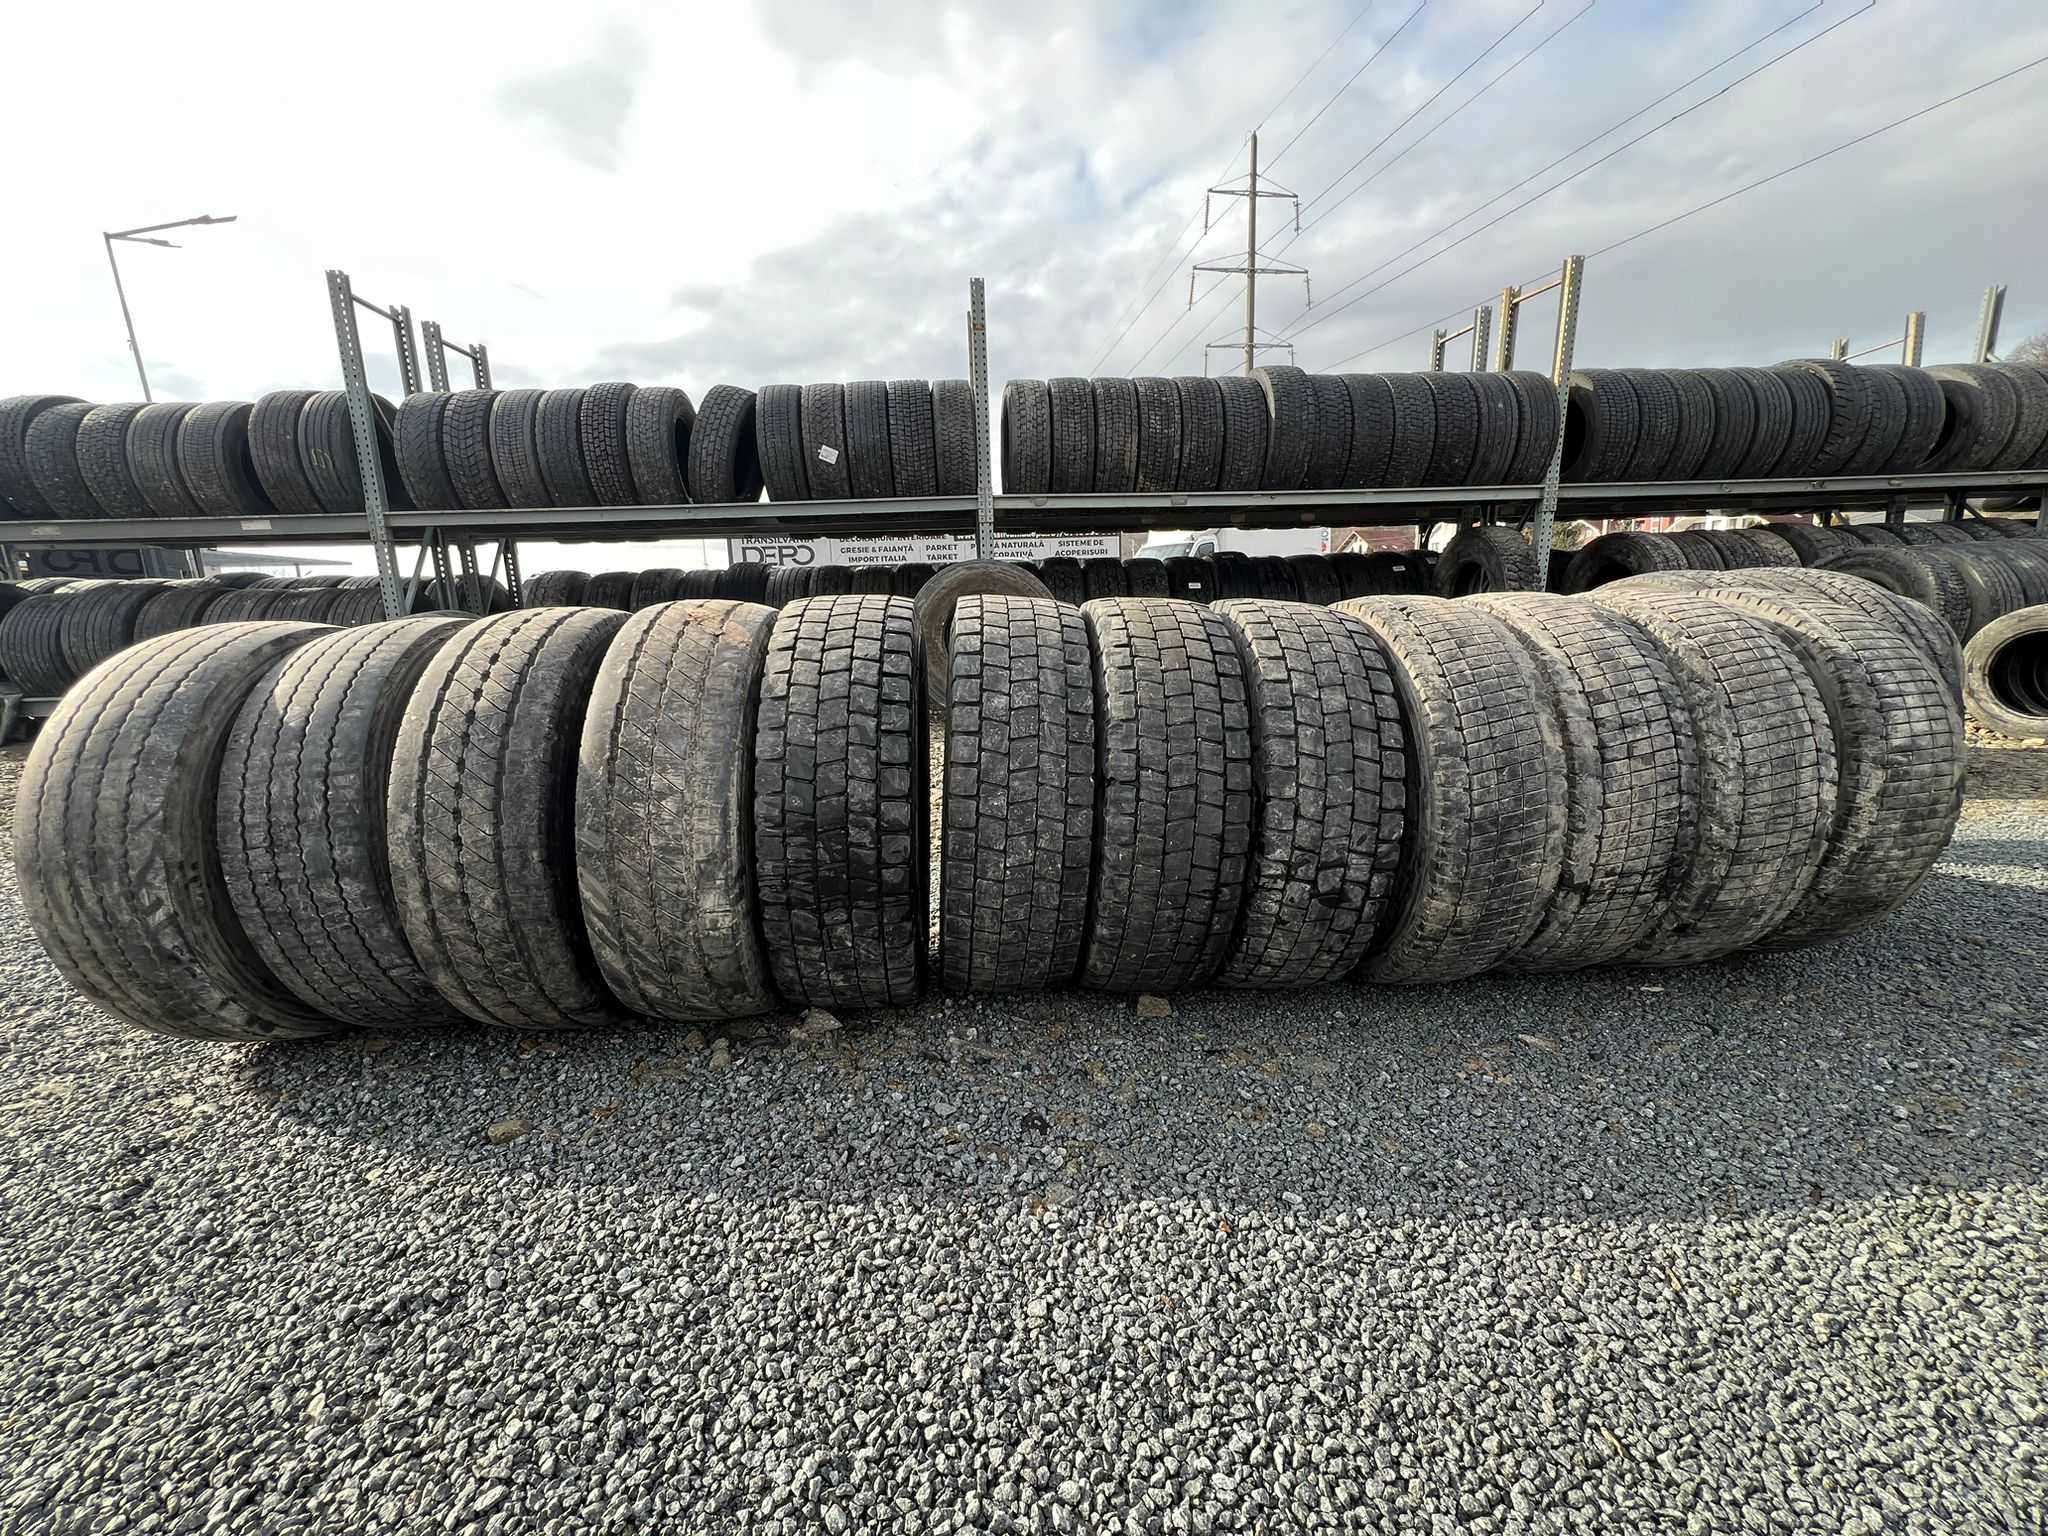 265/70R17.5 anvelope tractiue camion